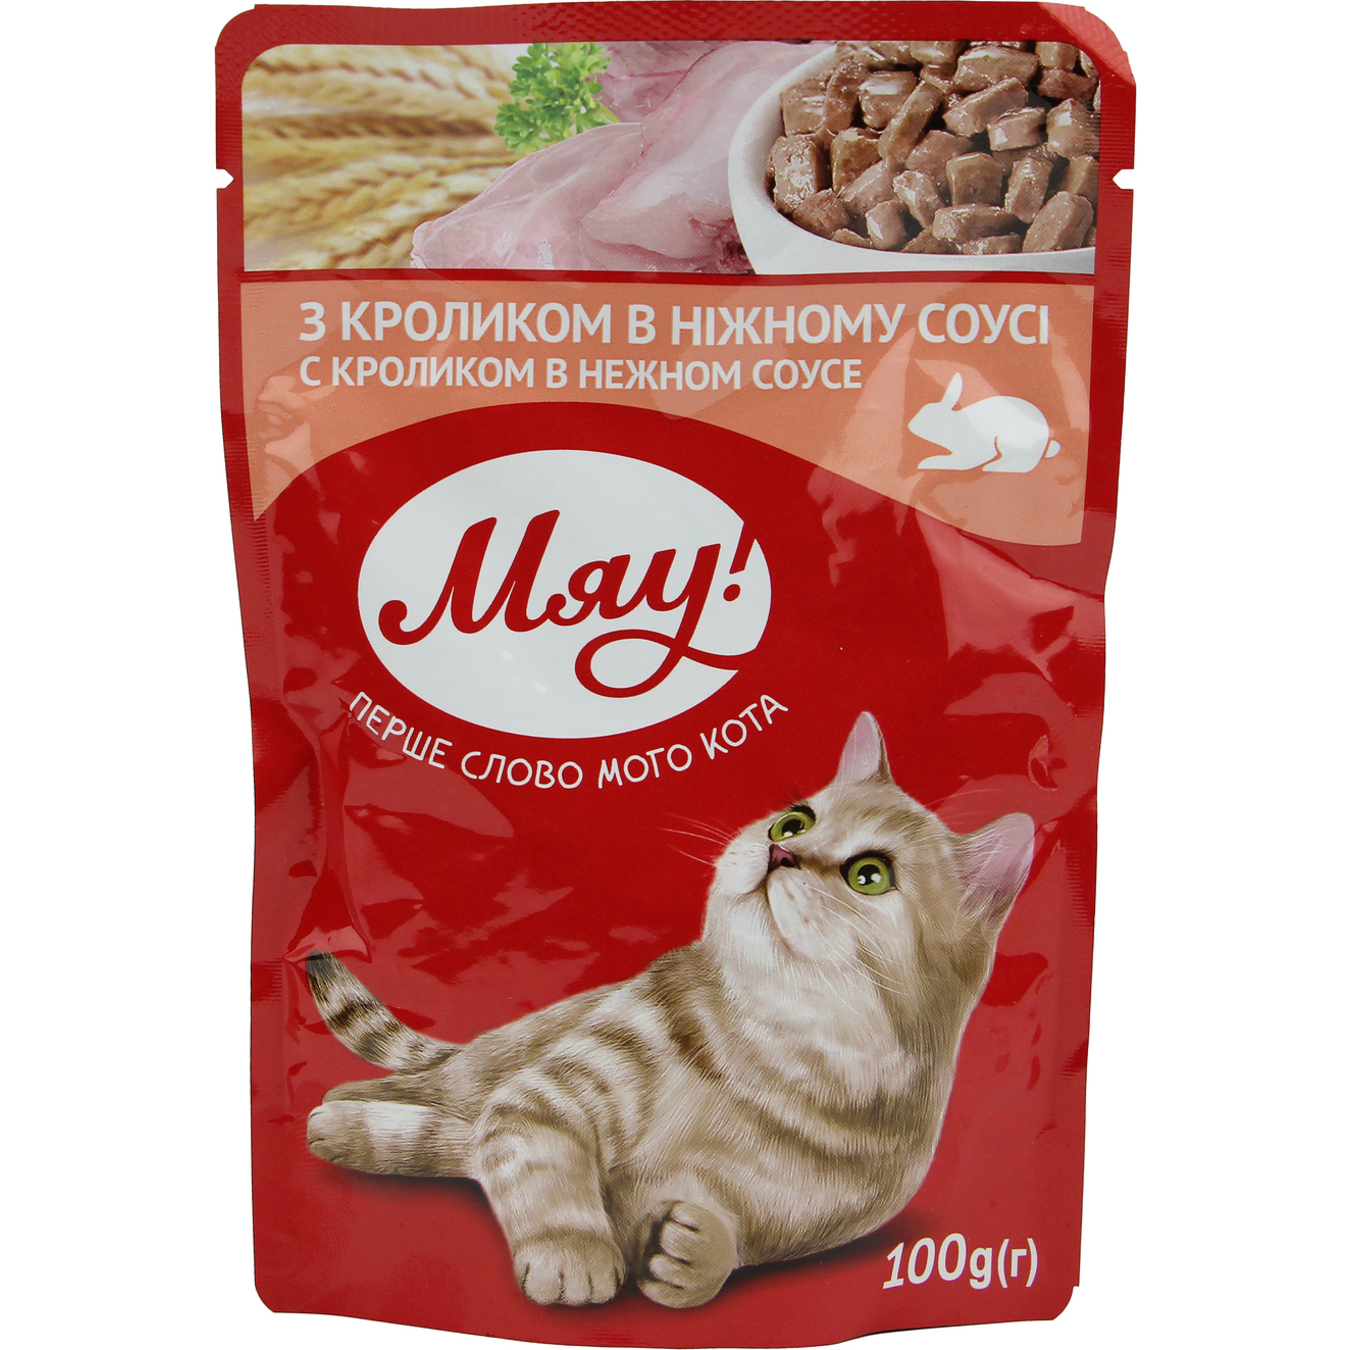 Miau! full-rationed canned pet food for adult cats With rabbit in delicate sauce 100g